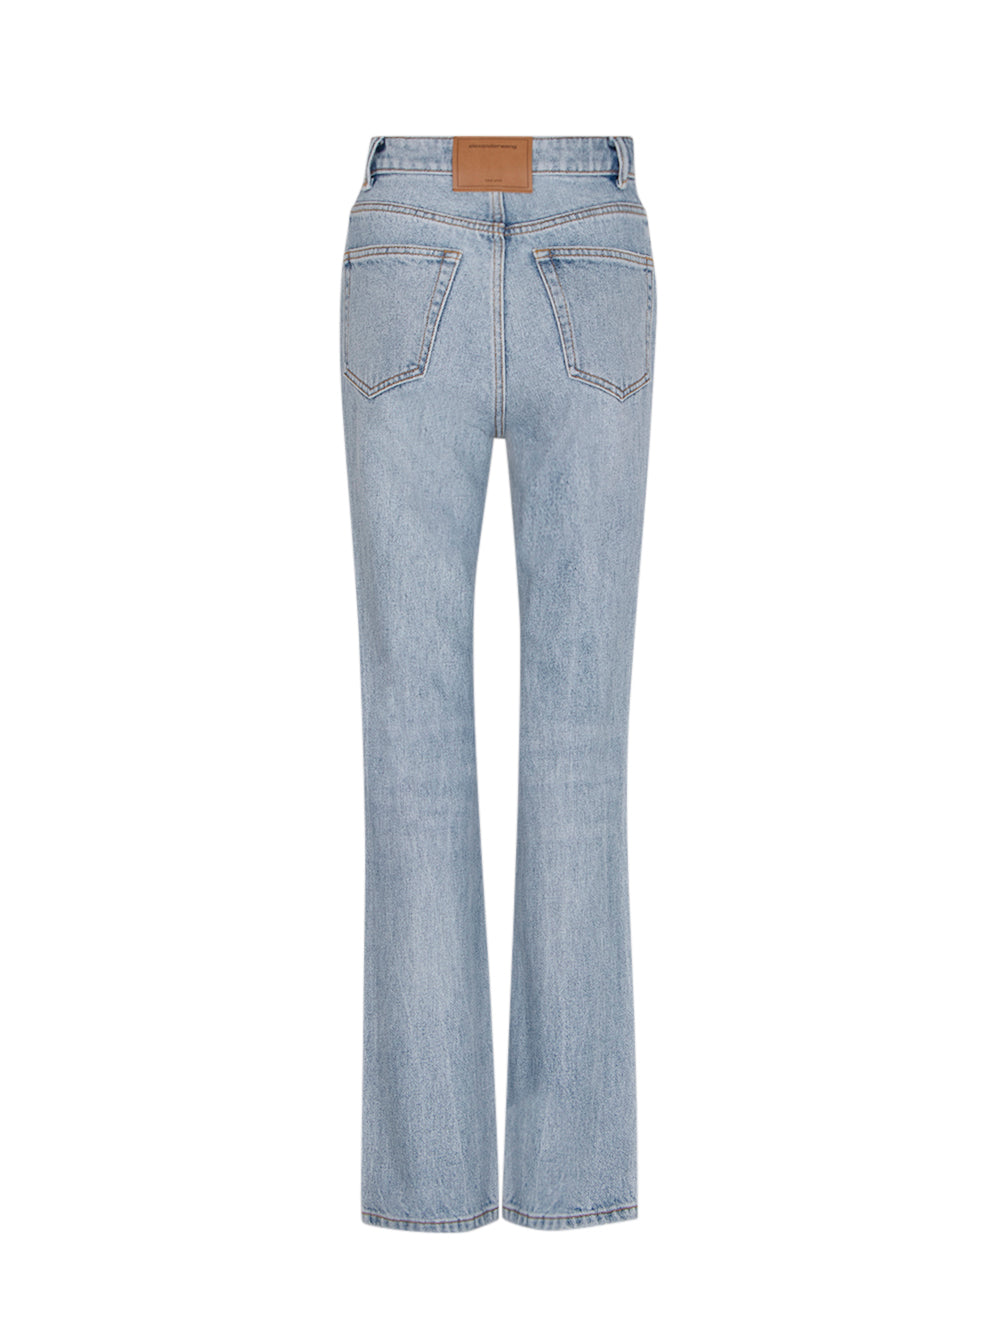    Alexander-Wang-Fly-High-Rise-Stacked-Jean-In-Denim-02